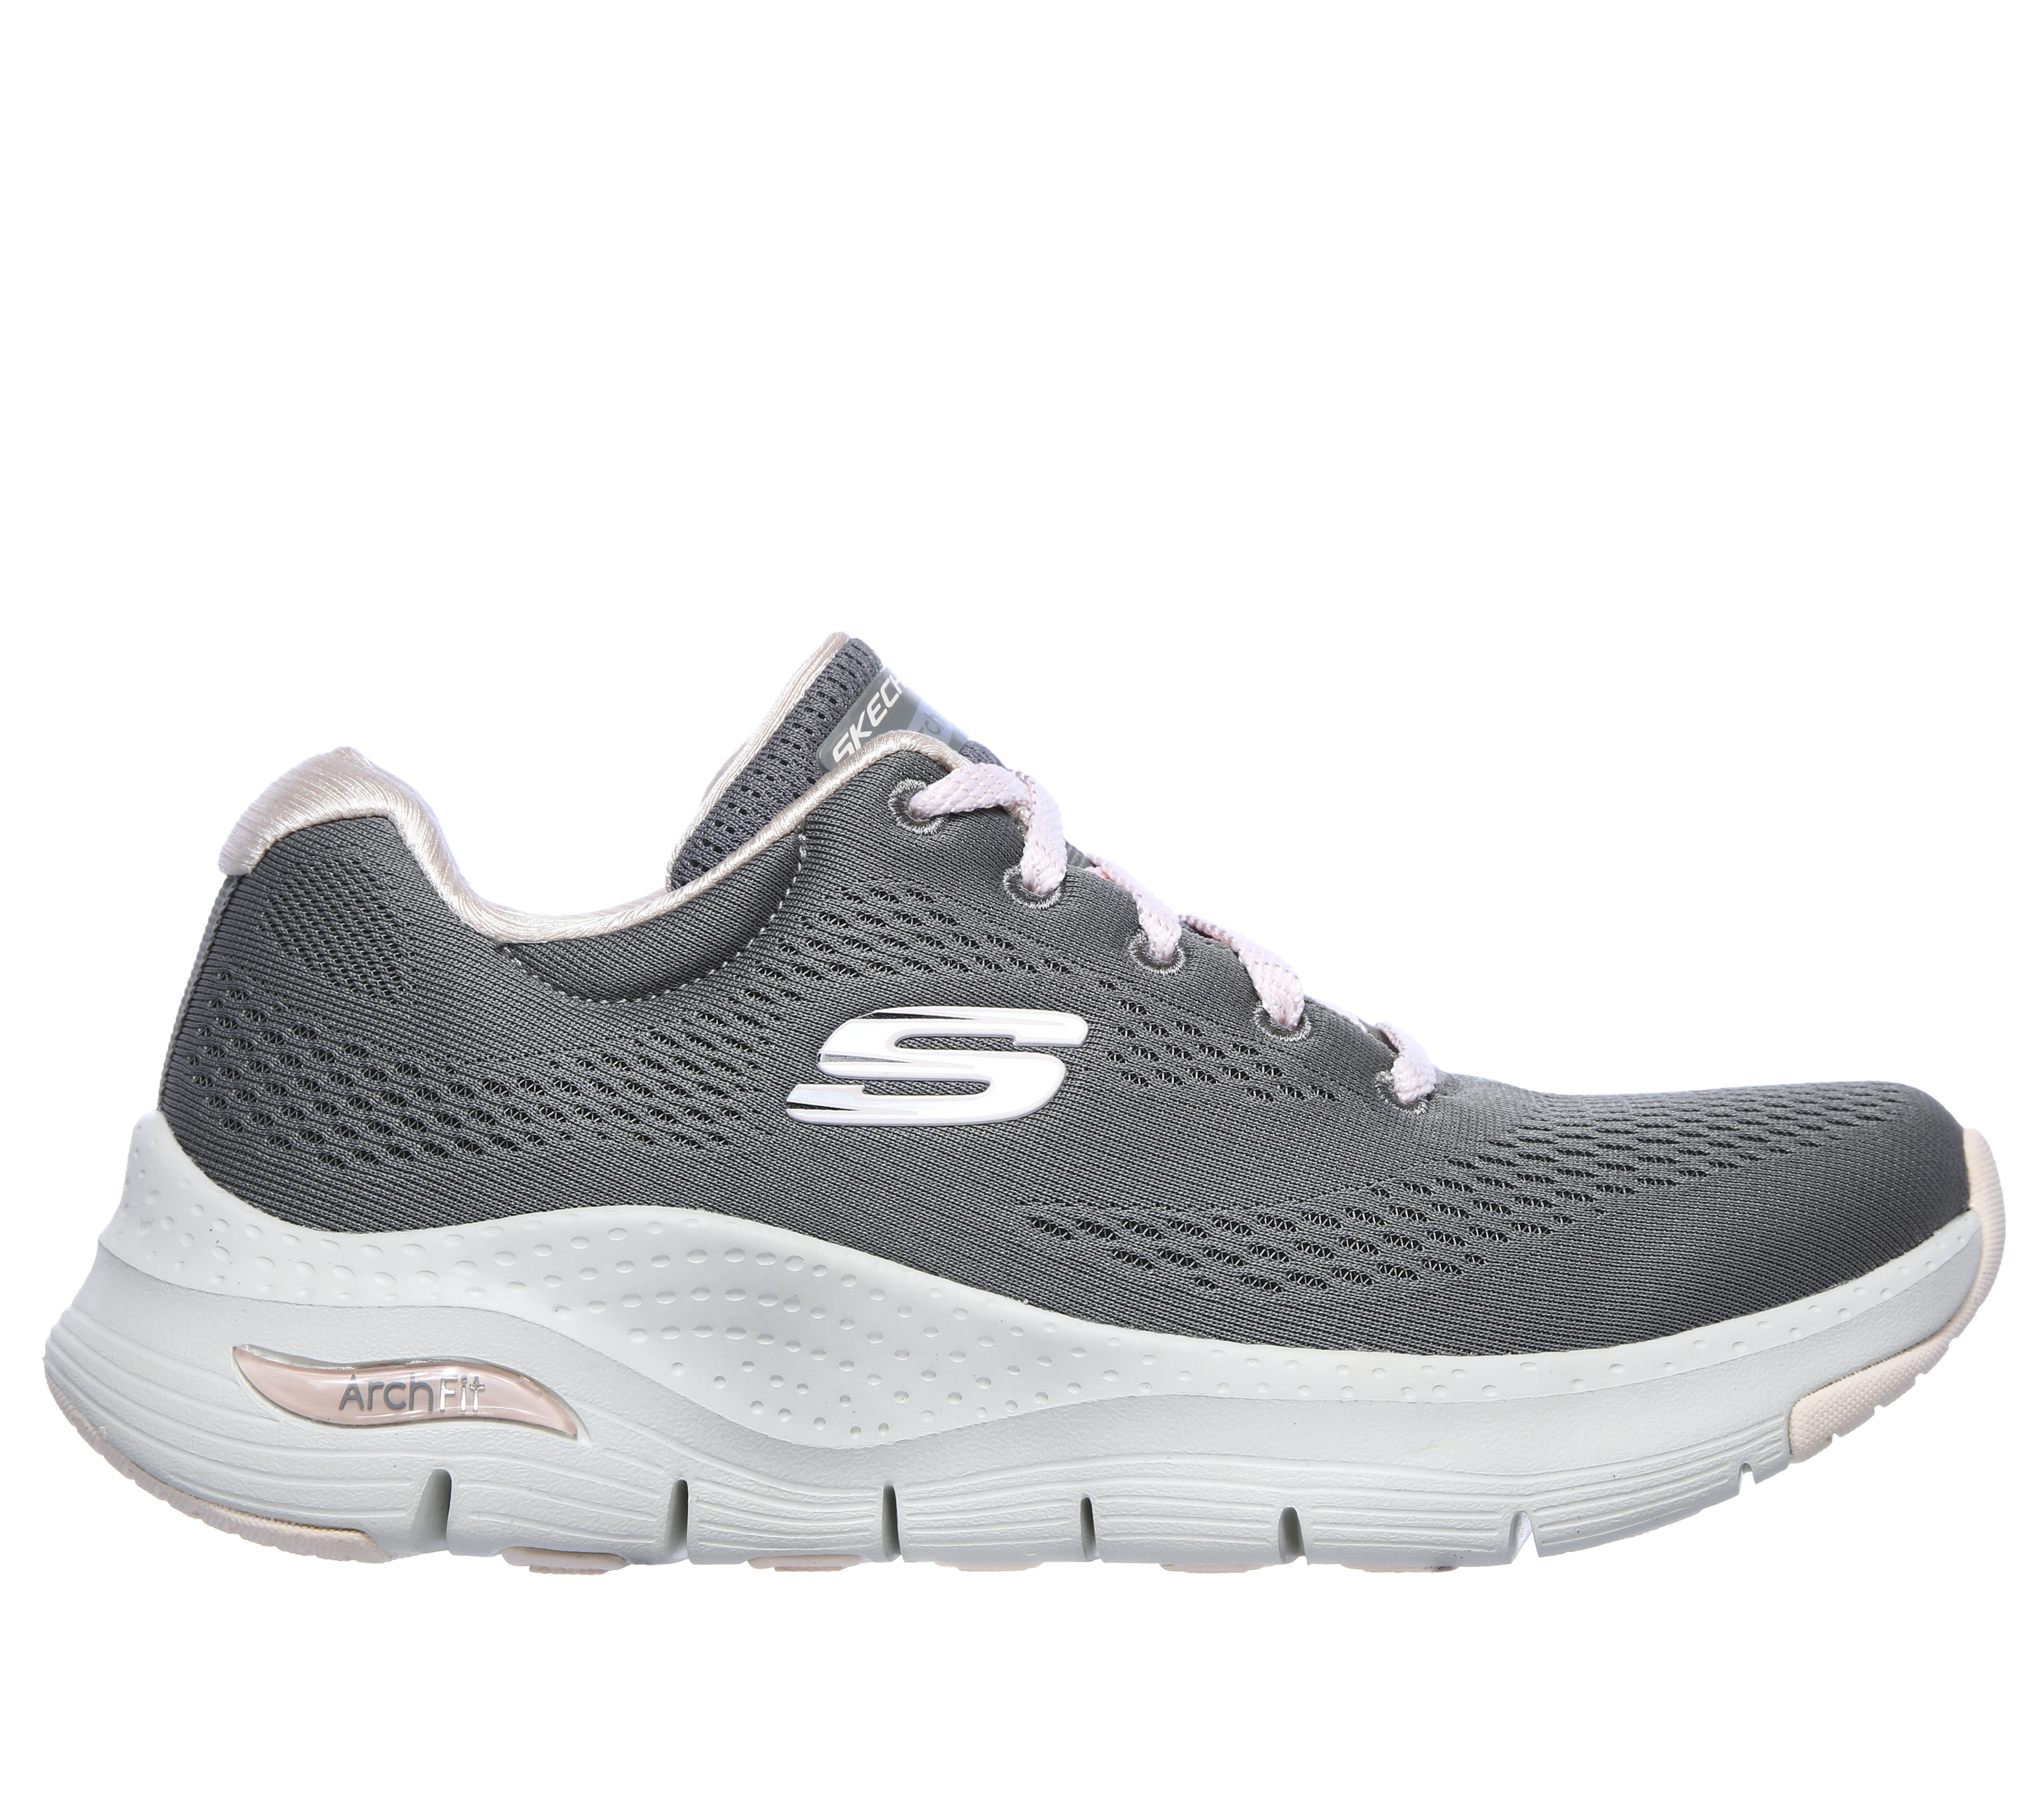 Skechers New Zealand - Introducing Skechers Arch Fit! With a